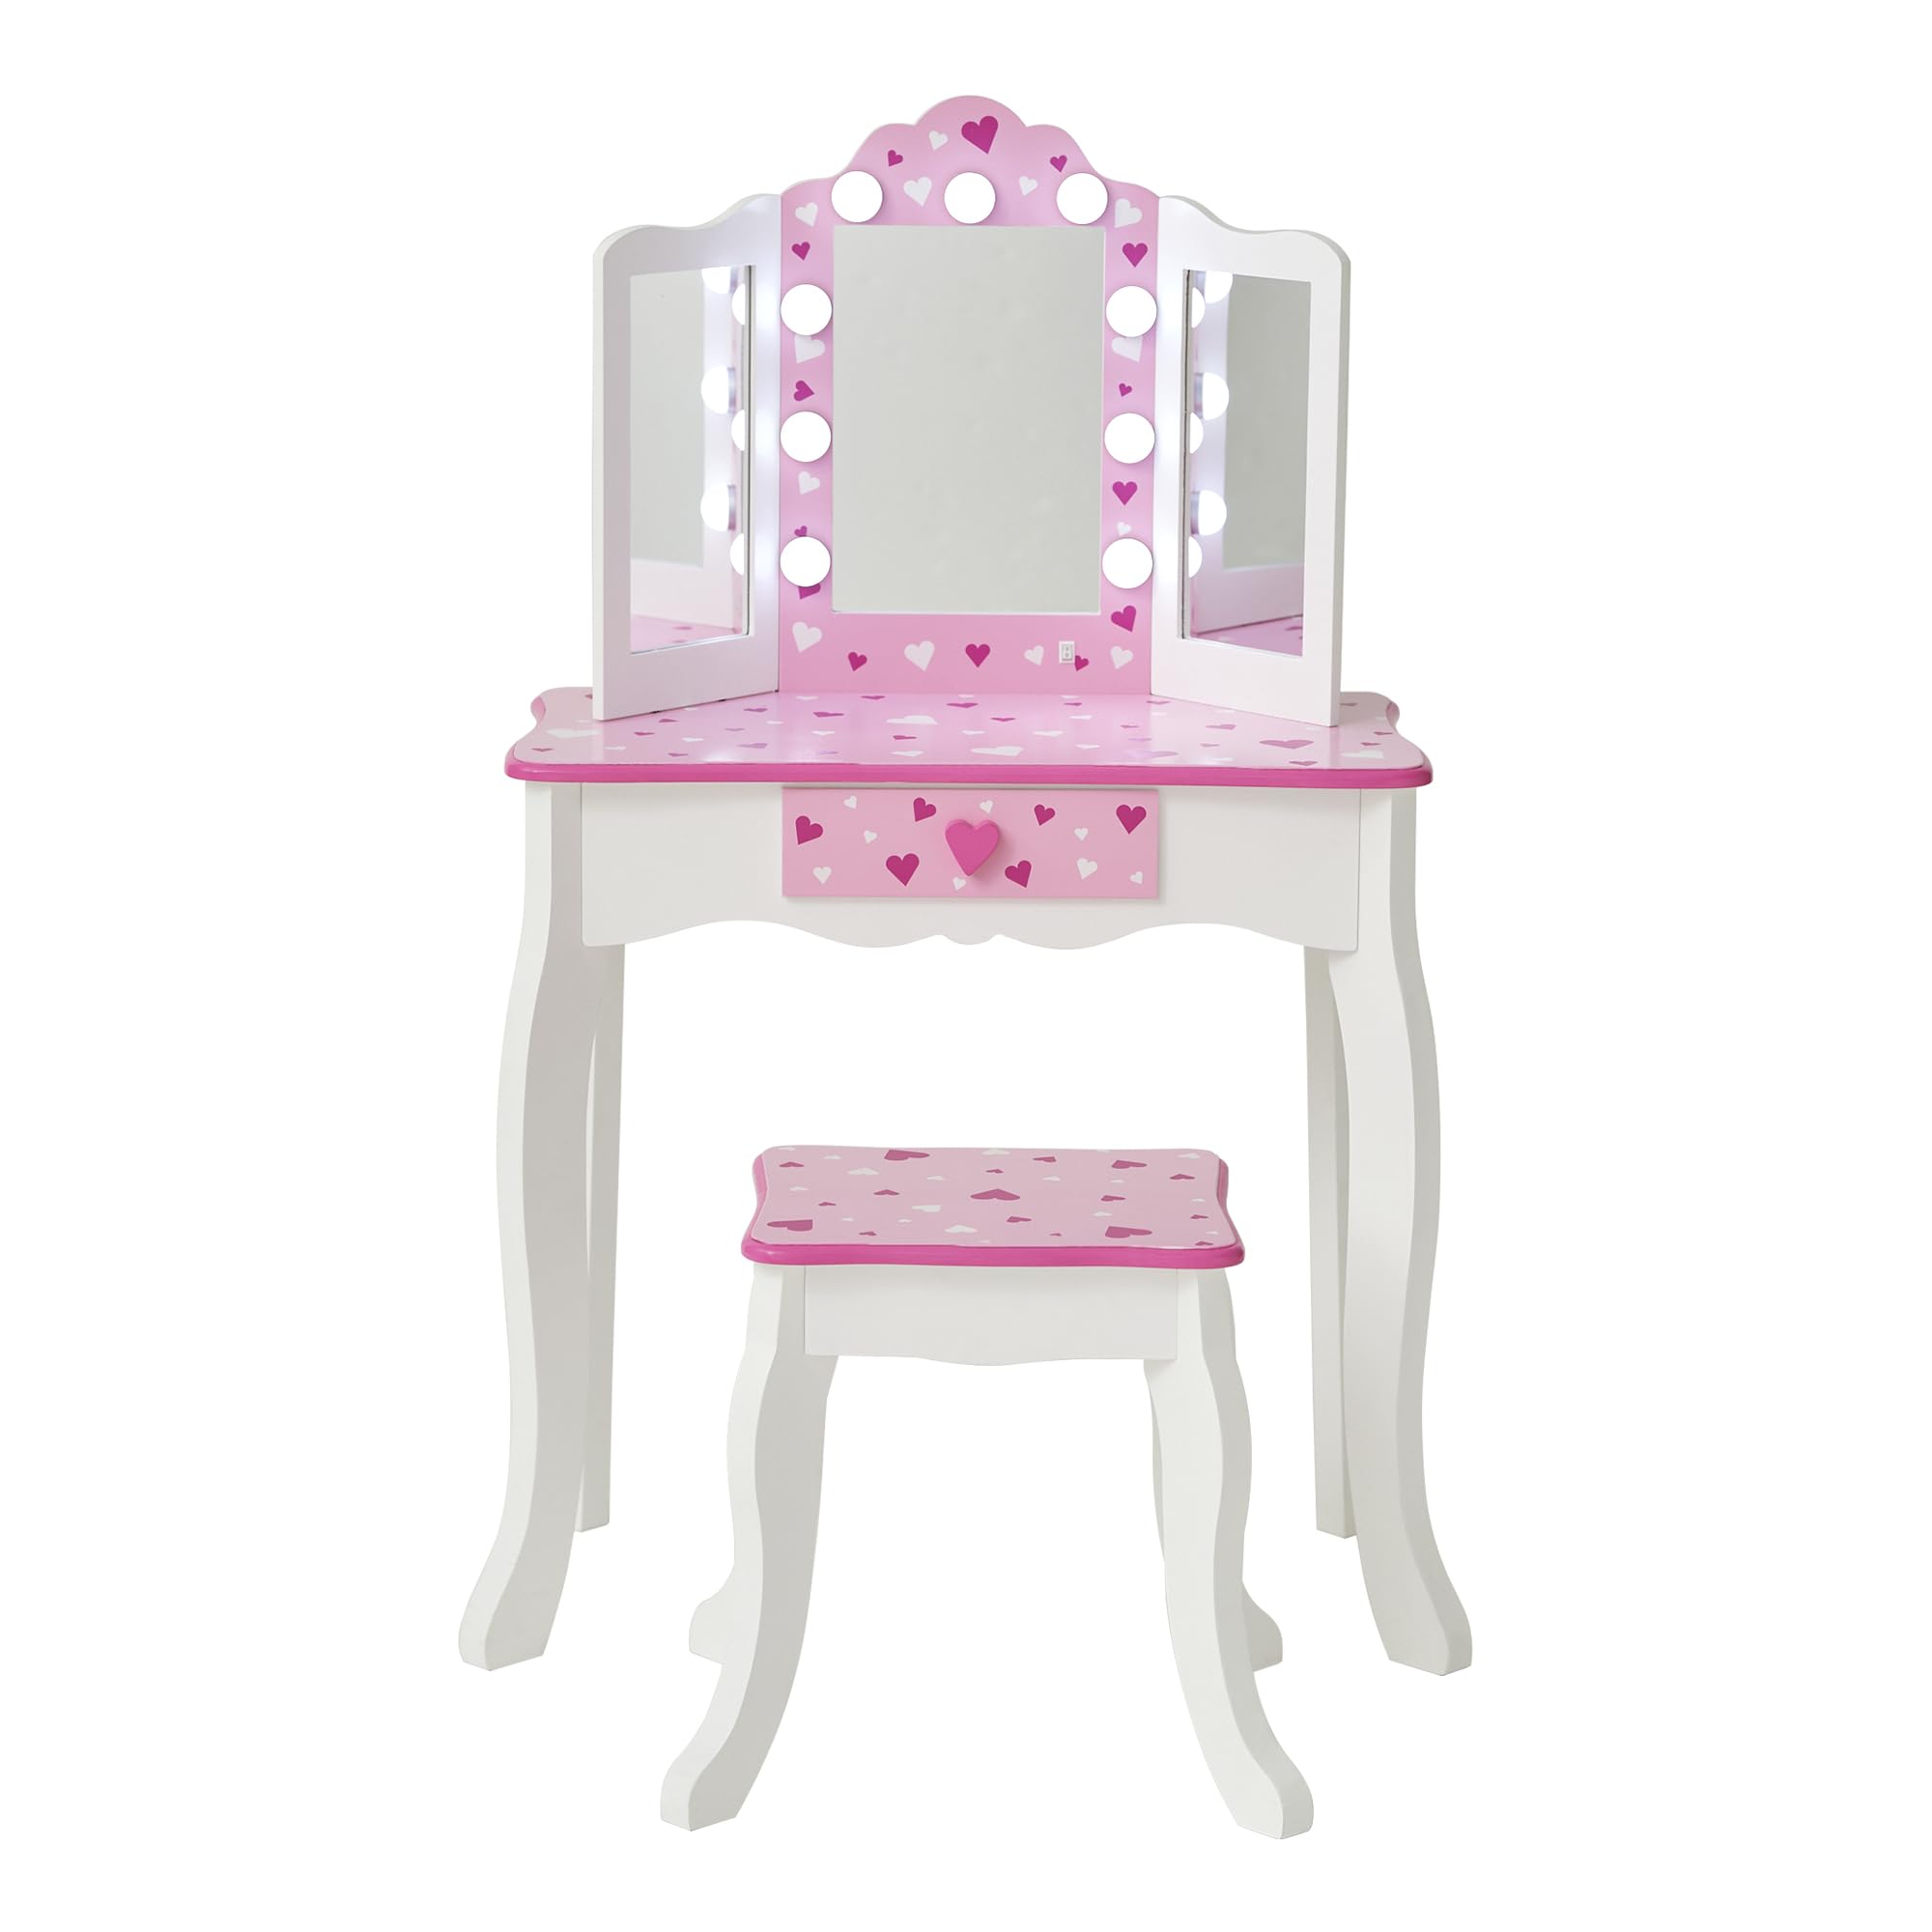 Teamson Kids - Pretend Play Kids Vanity, Table and Chair Vanity Set with LED Mirror Makeup Dressing Table with Drawer, Sweethearts Print Gisele Play Vanity Set, White/Pink, Gift for Ages 3+